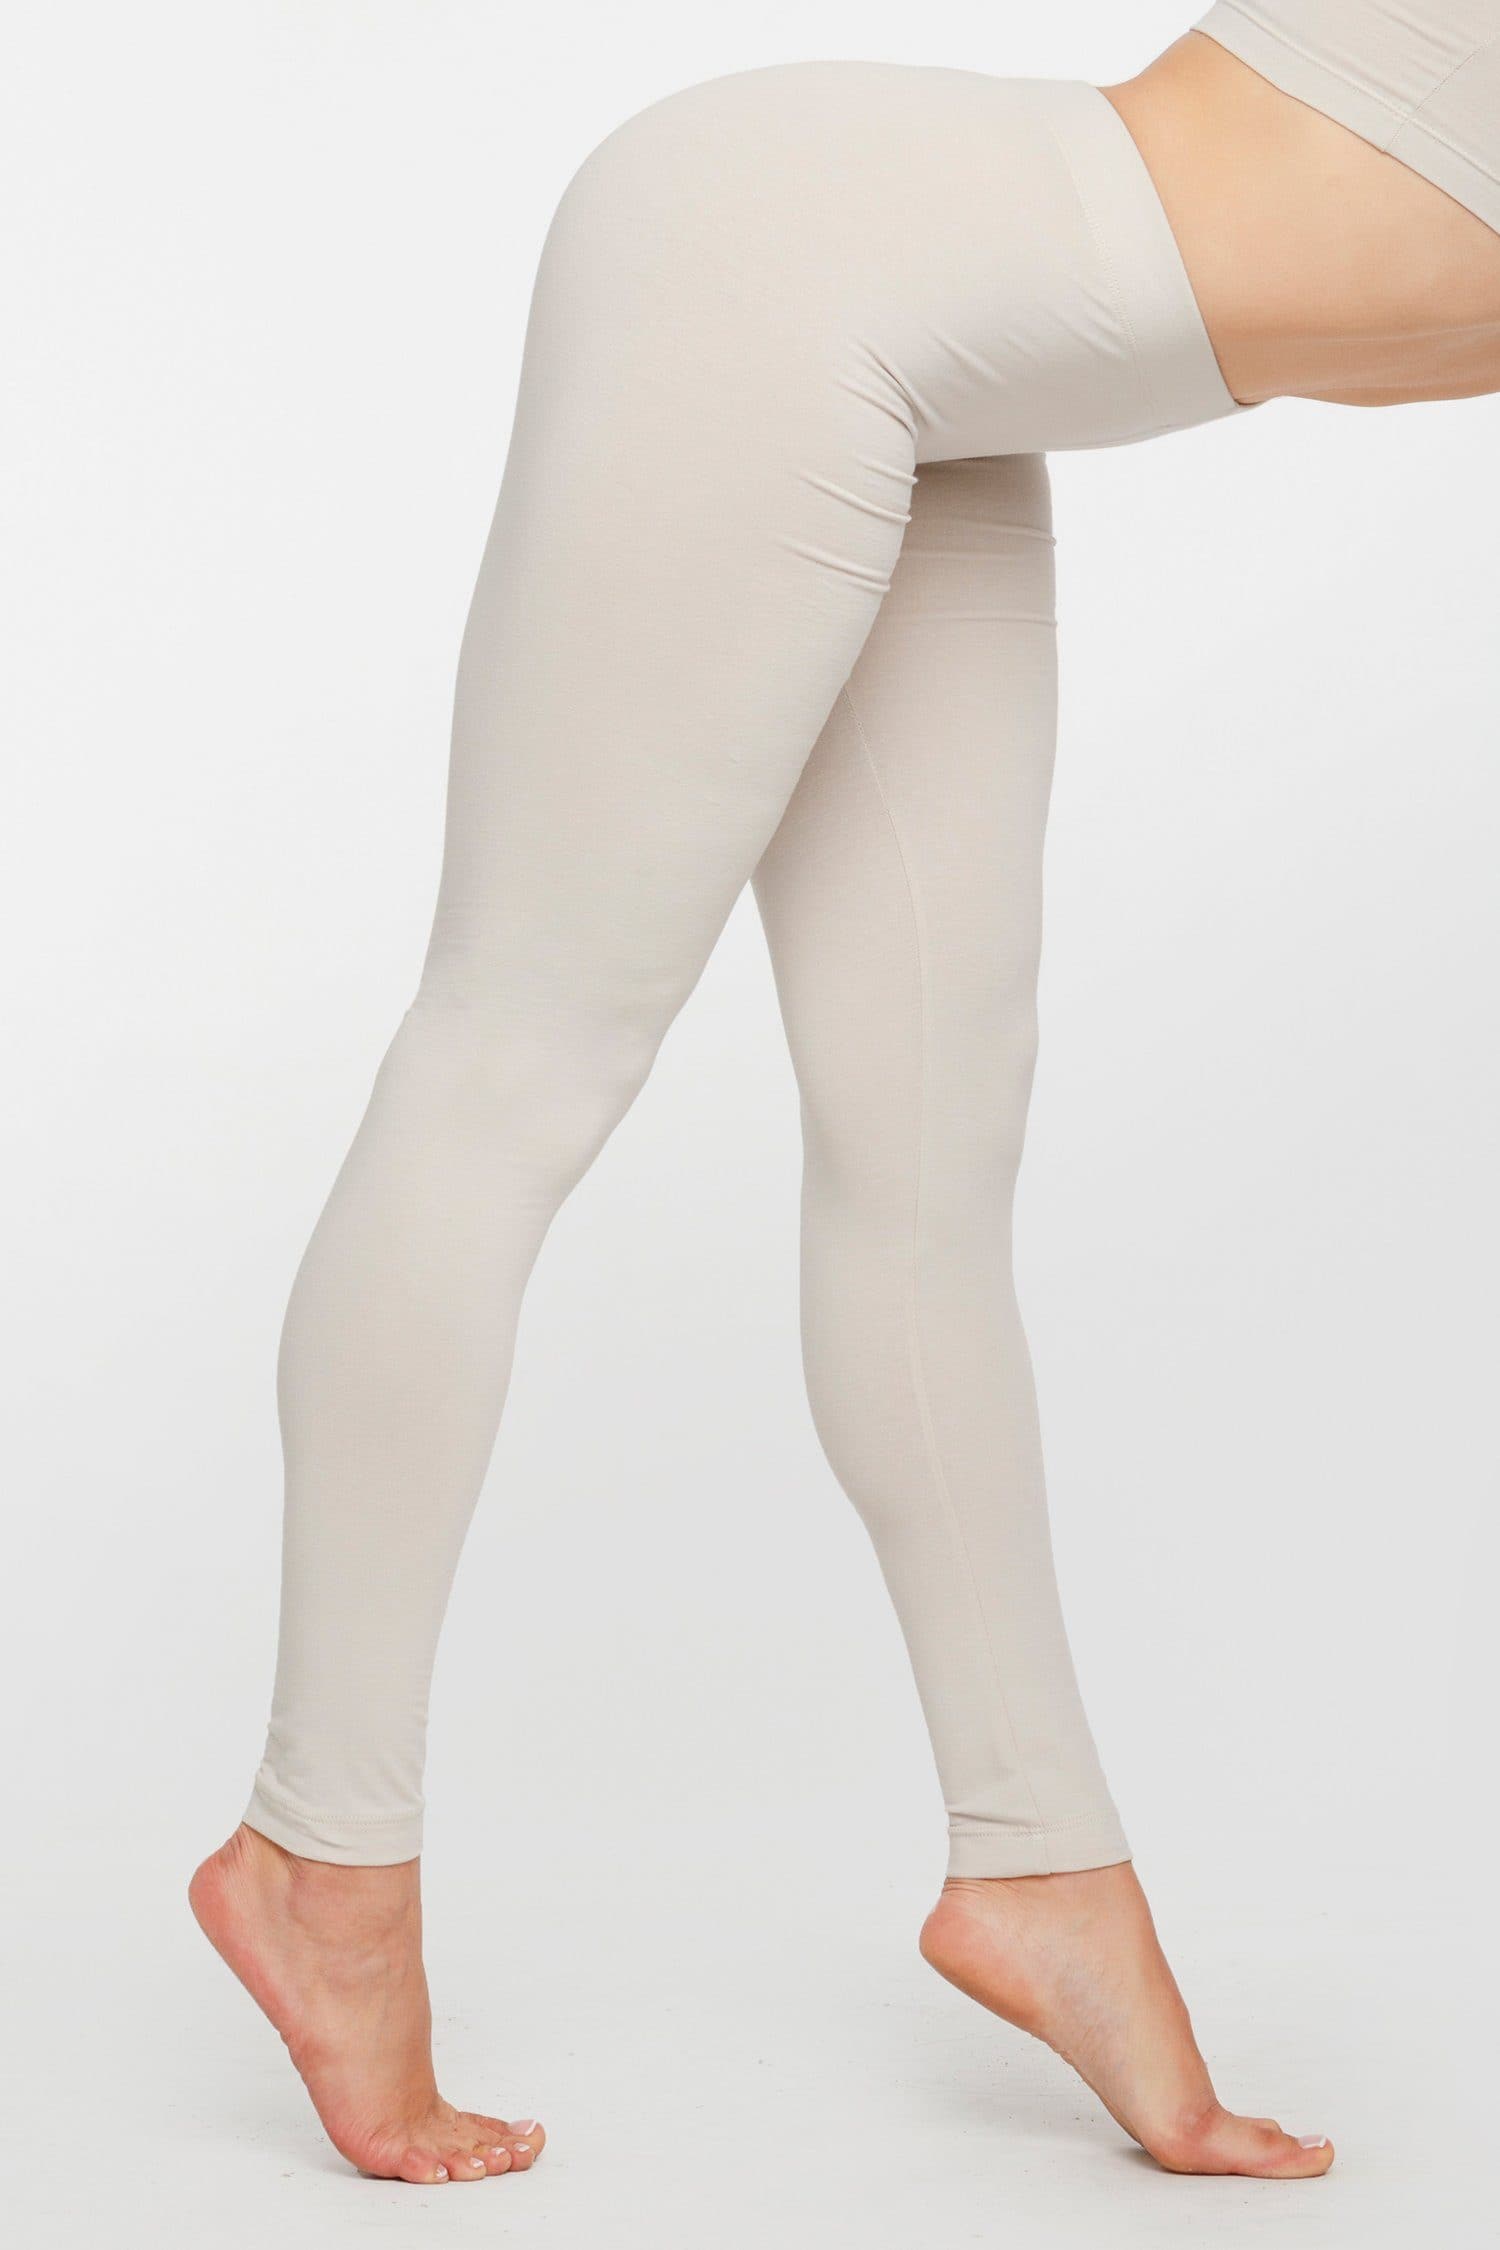 JKC USA Selected Premium Cotton Full Length Solid Color Leggings  OP-1851,Small,White at  Women's Clothing store